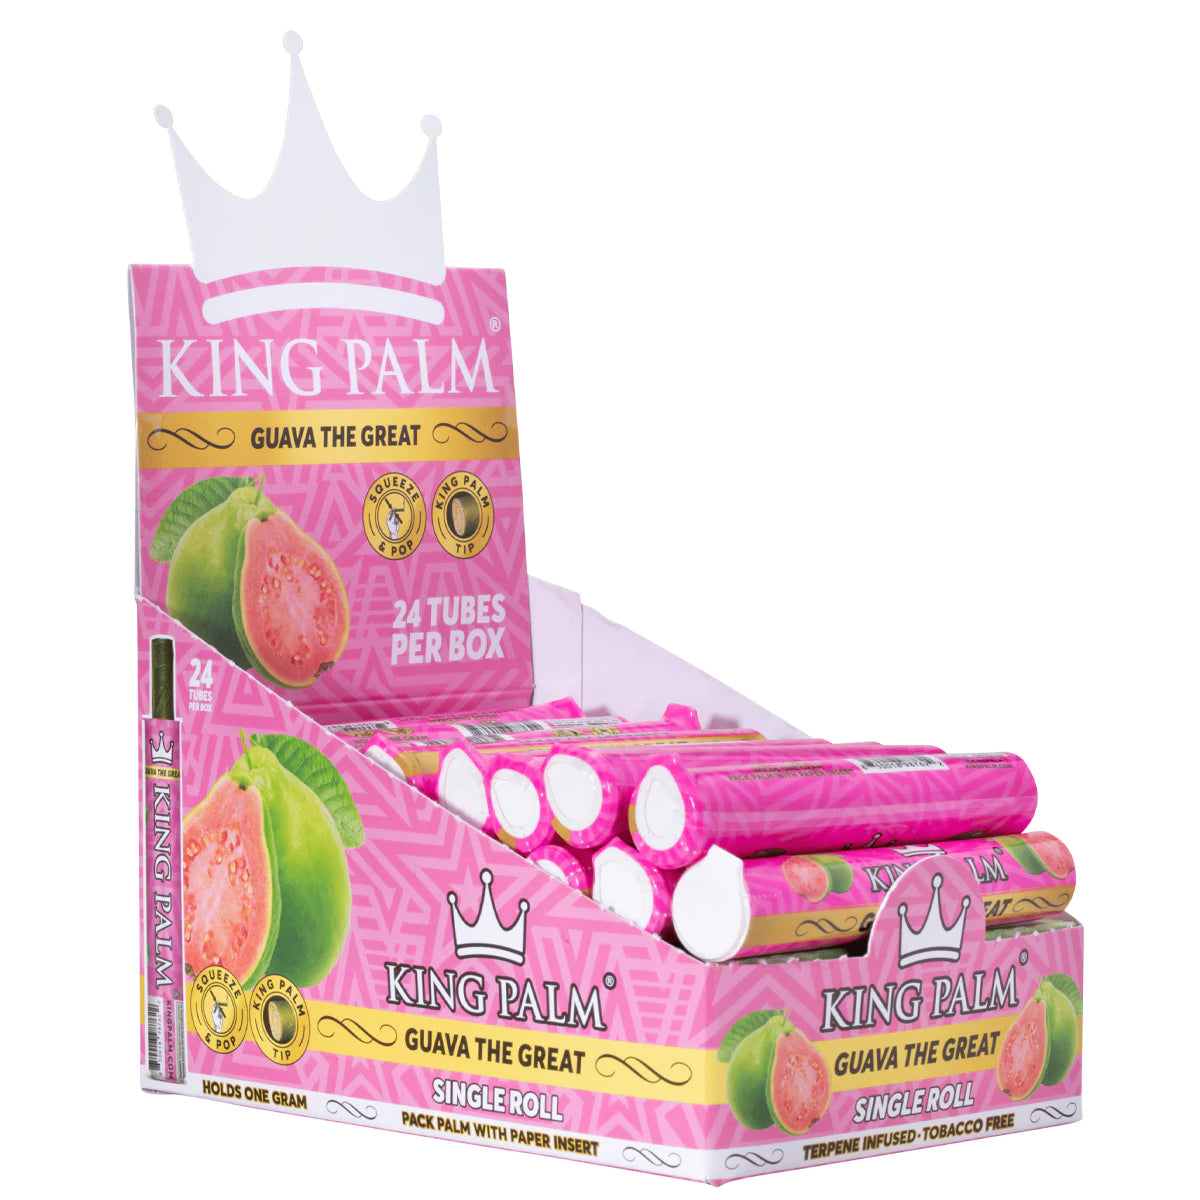 KING PALM TERPENE INFUSED TOBACCO FREE WRAPS MINI SIZE GUAVA THE GREAT 24 TUBES